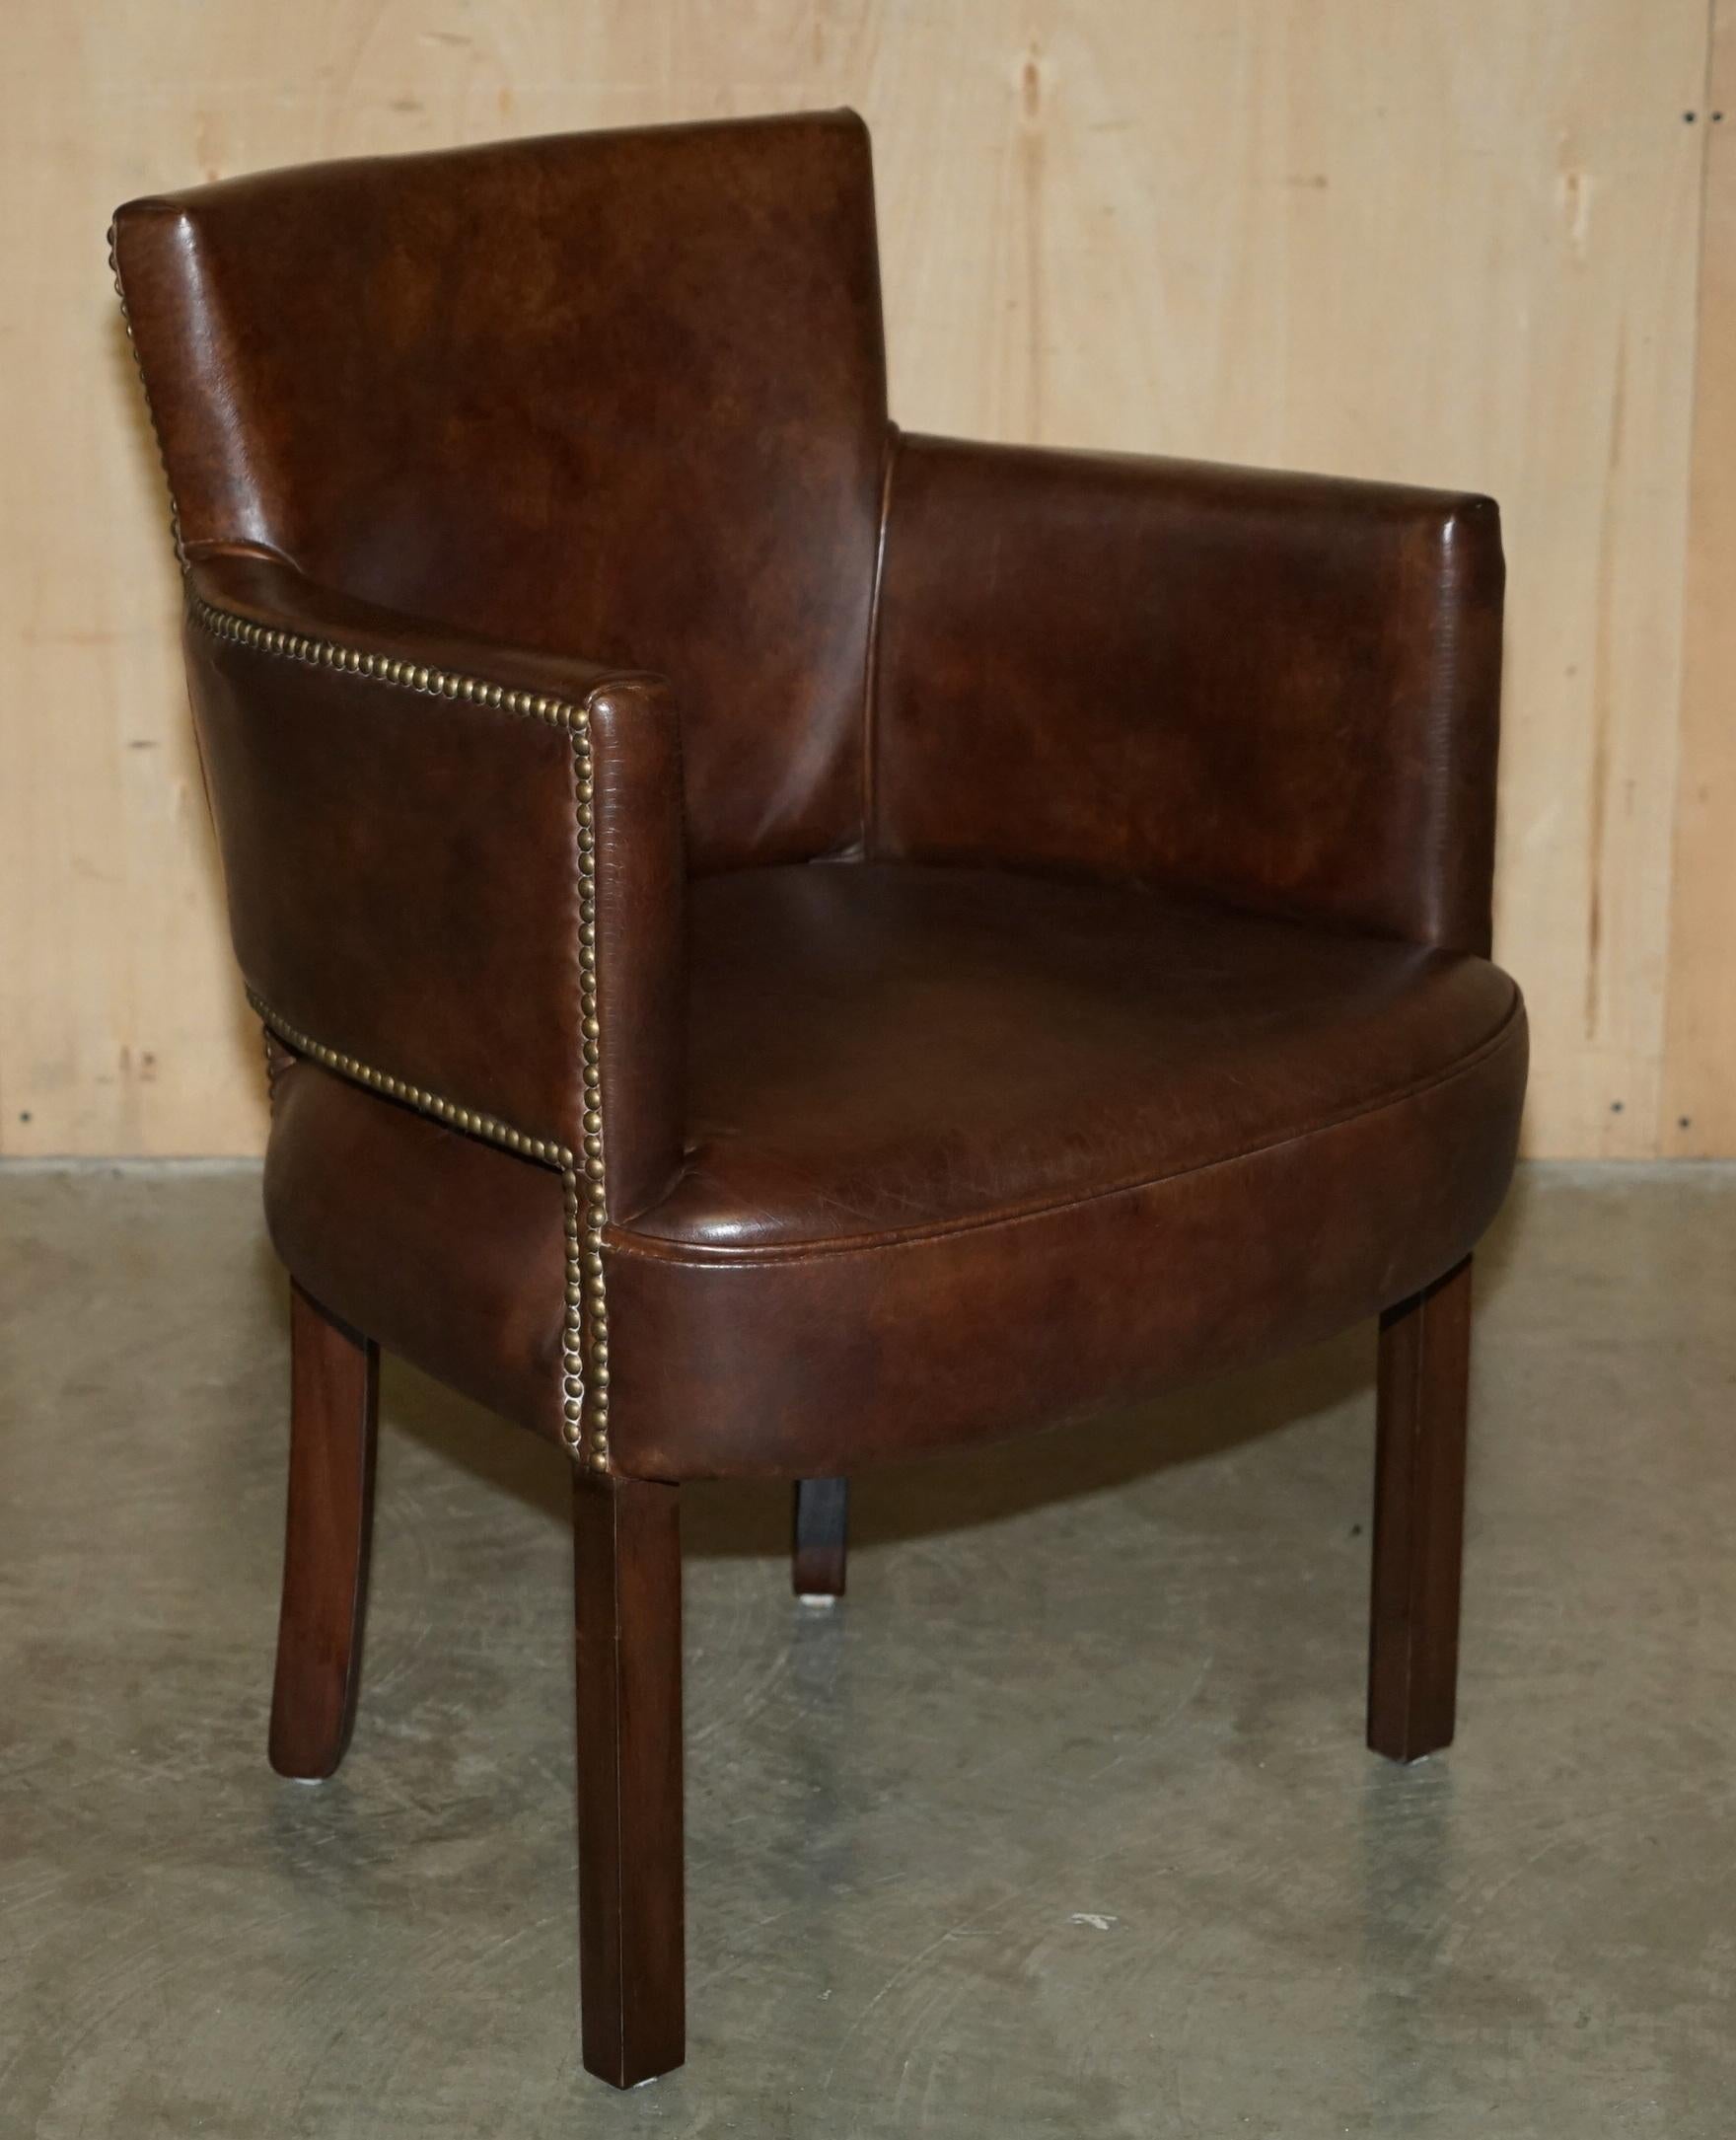 FINE PAIR OF ViNTAGE HALO HERITAGE BROWN LEATHER OCCASIONAL OR DINING CHAIRS 5